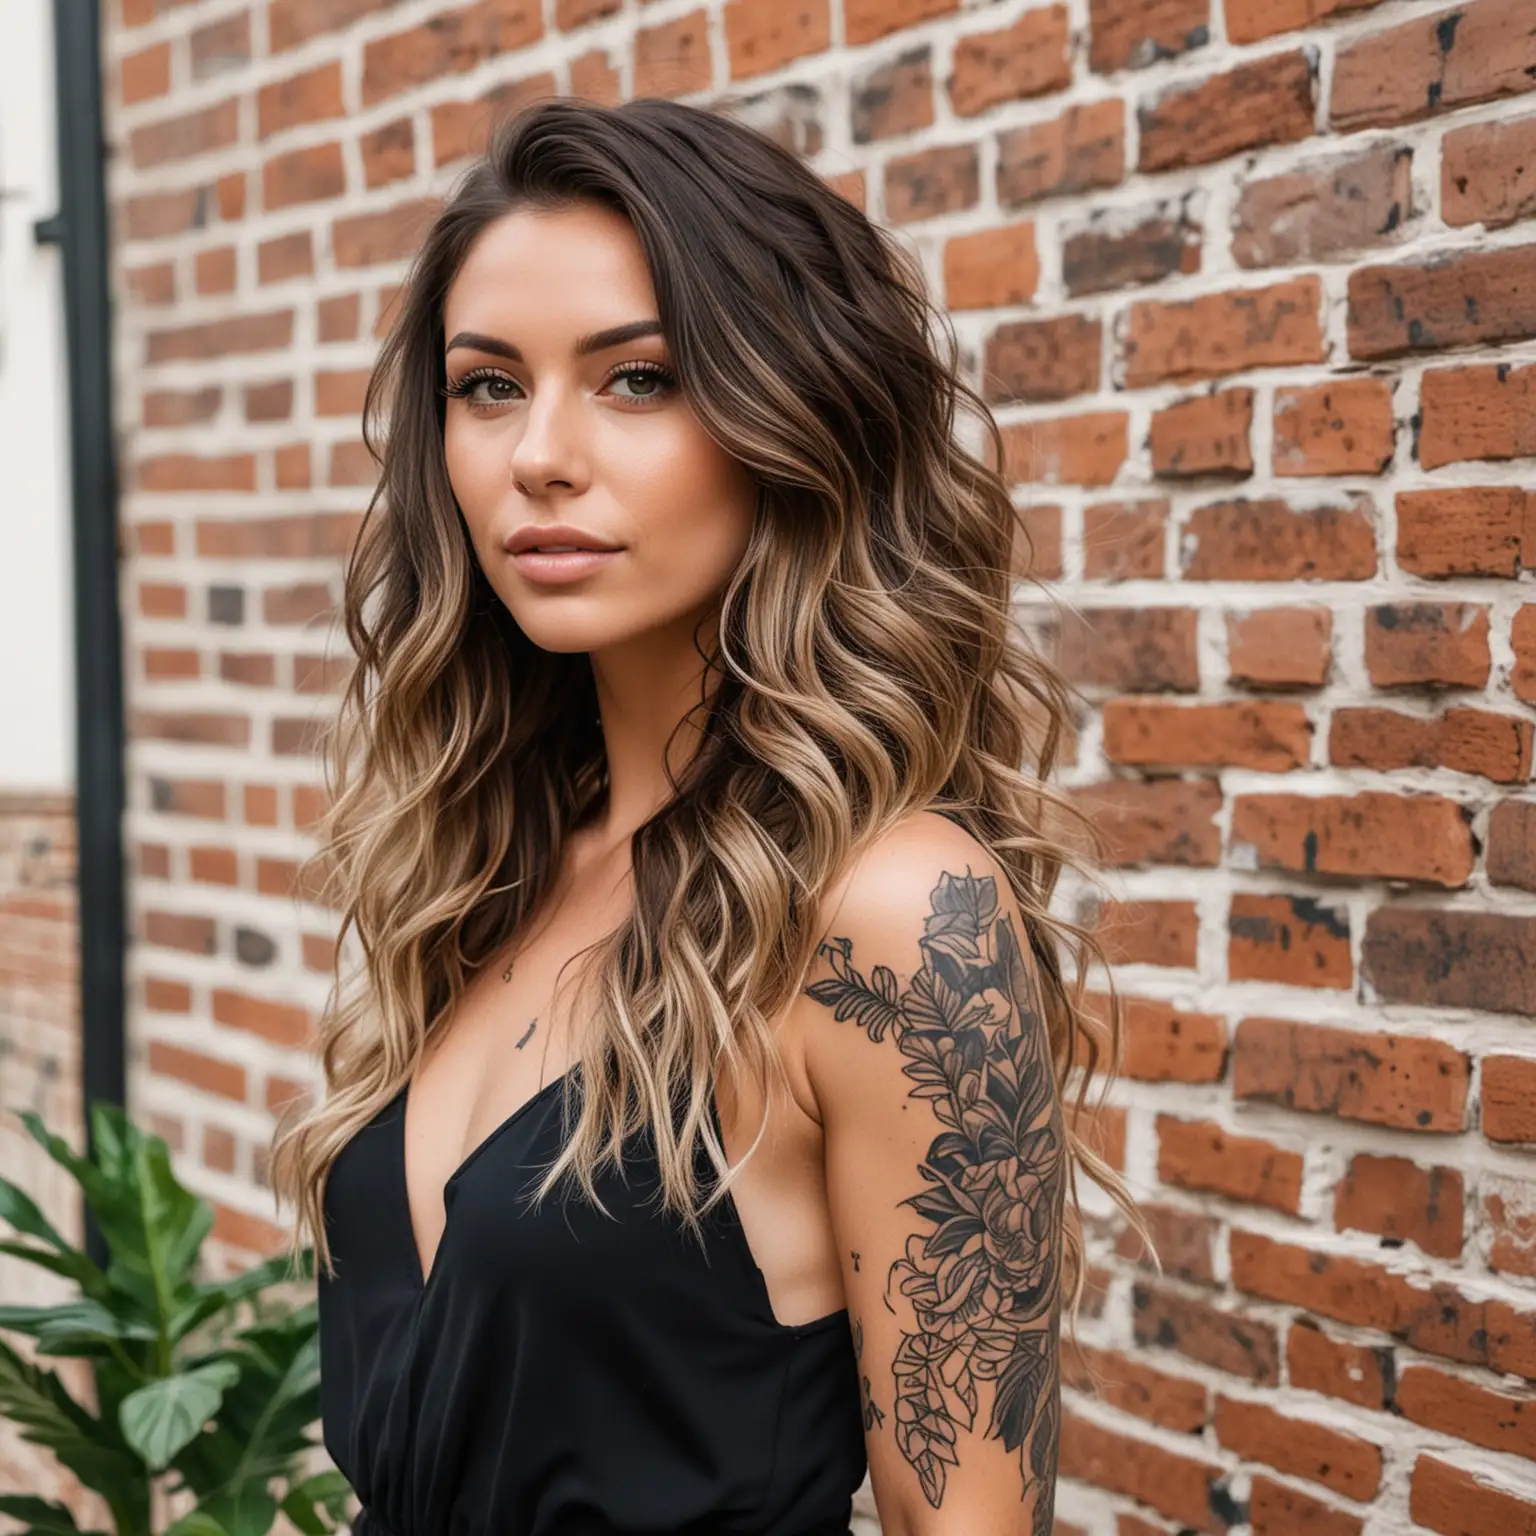 hair model in long wavy balayage hair. wearing black jumpsuit. Background is the inside of white old school brick warehouse with a tropical plant. semi hidden tattoos. Focal point is the hair.